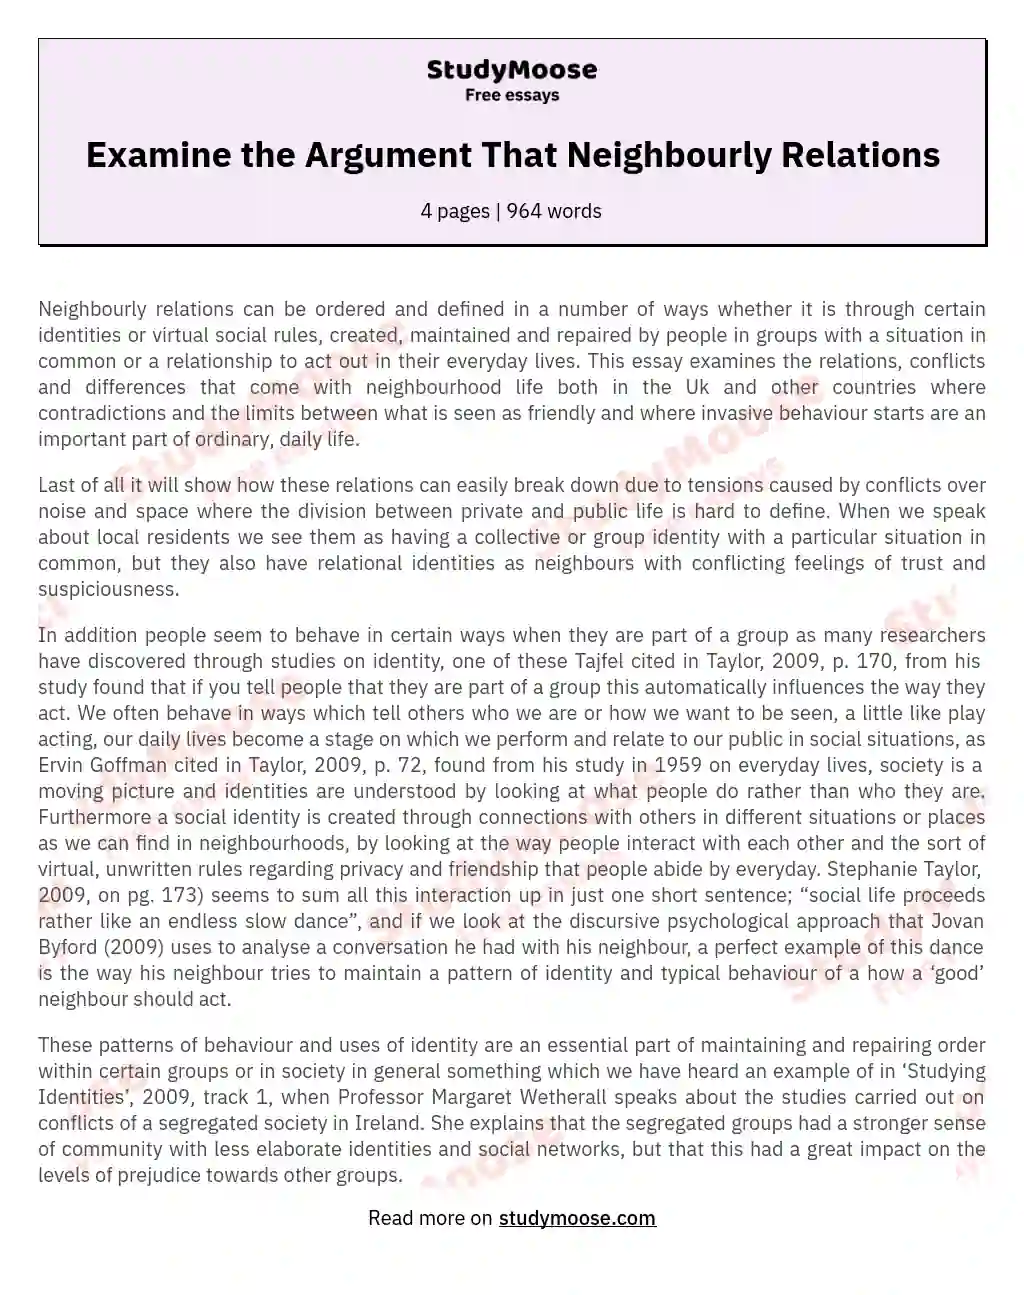 Examine the Argument That Neighbourly Relations essay